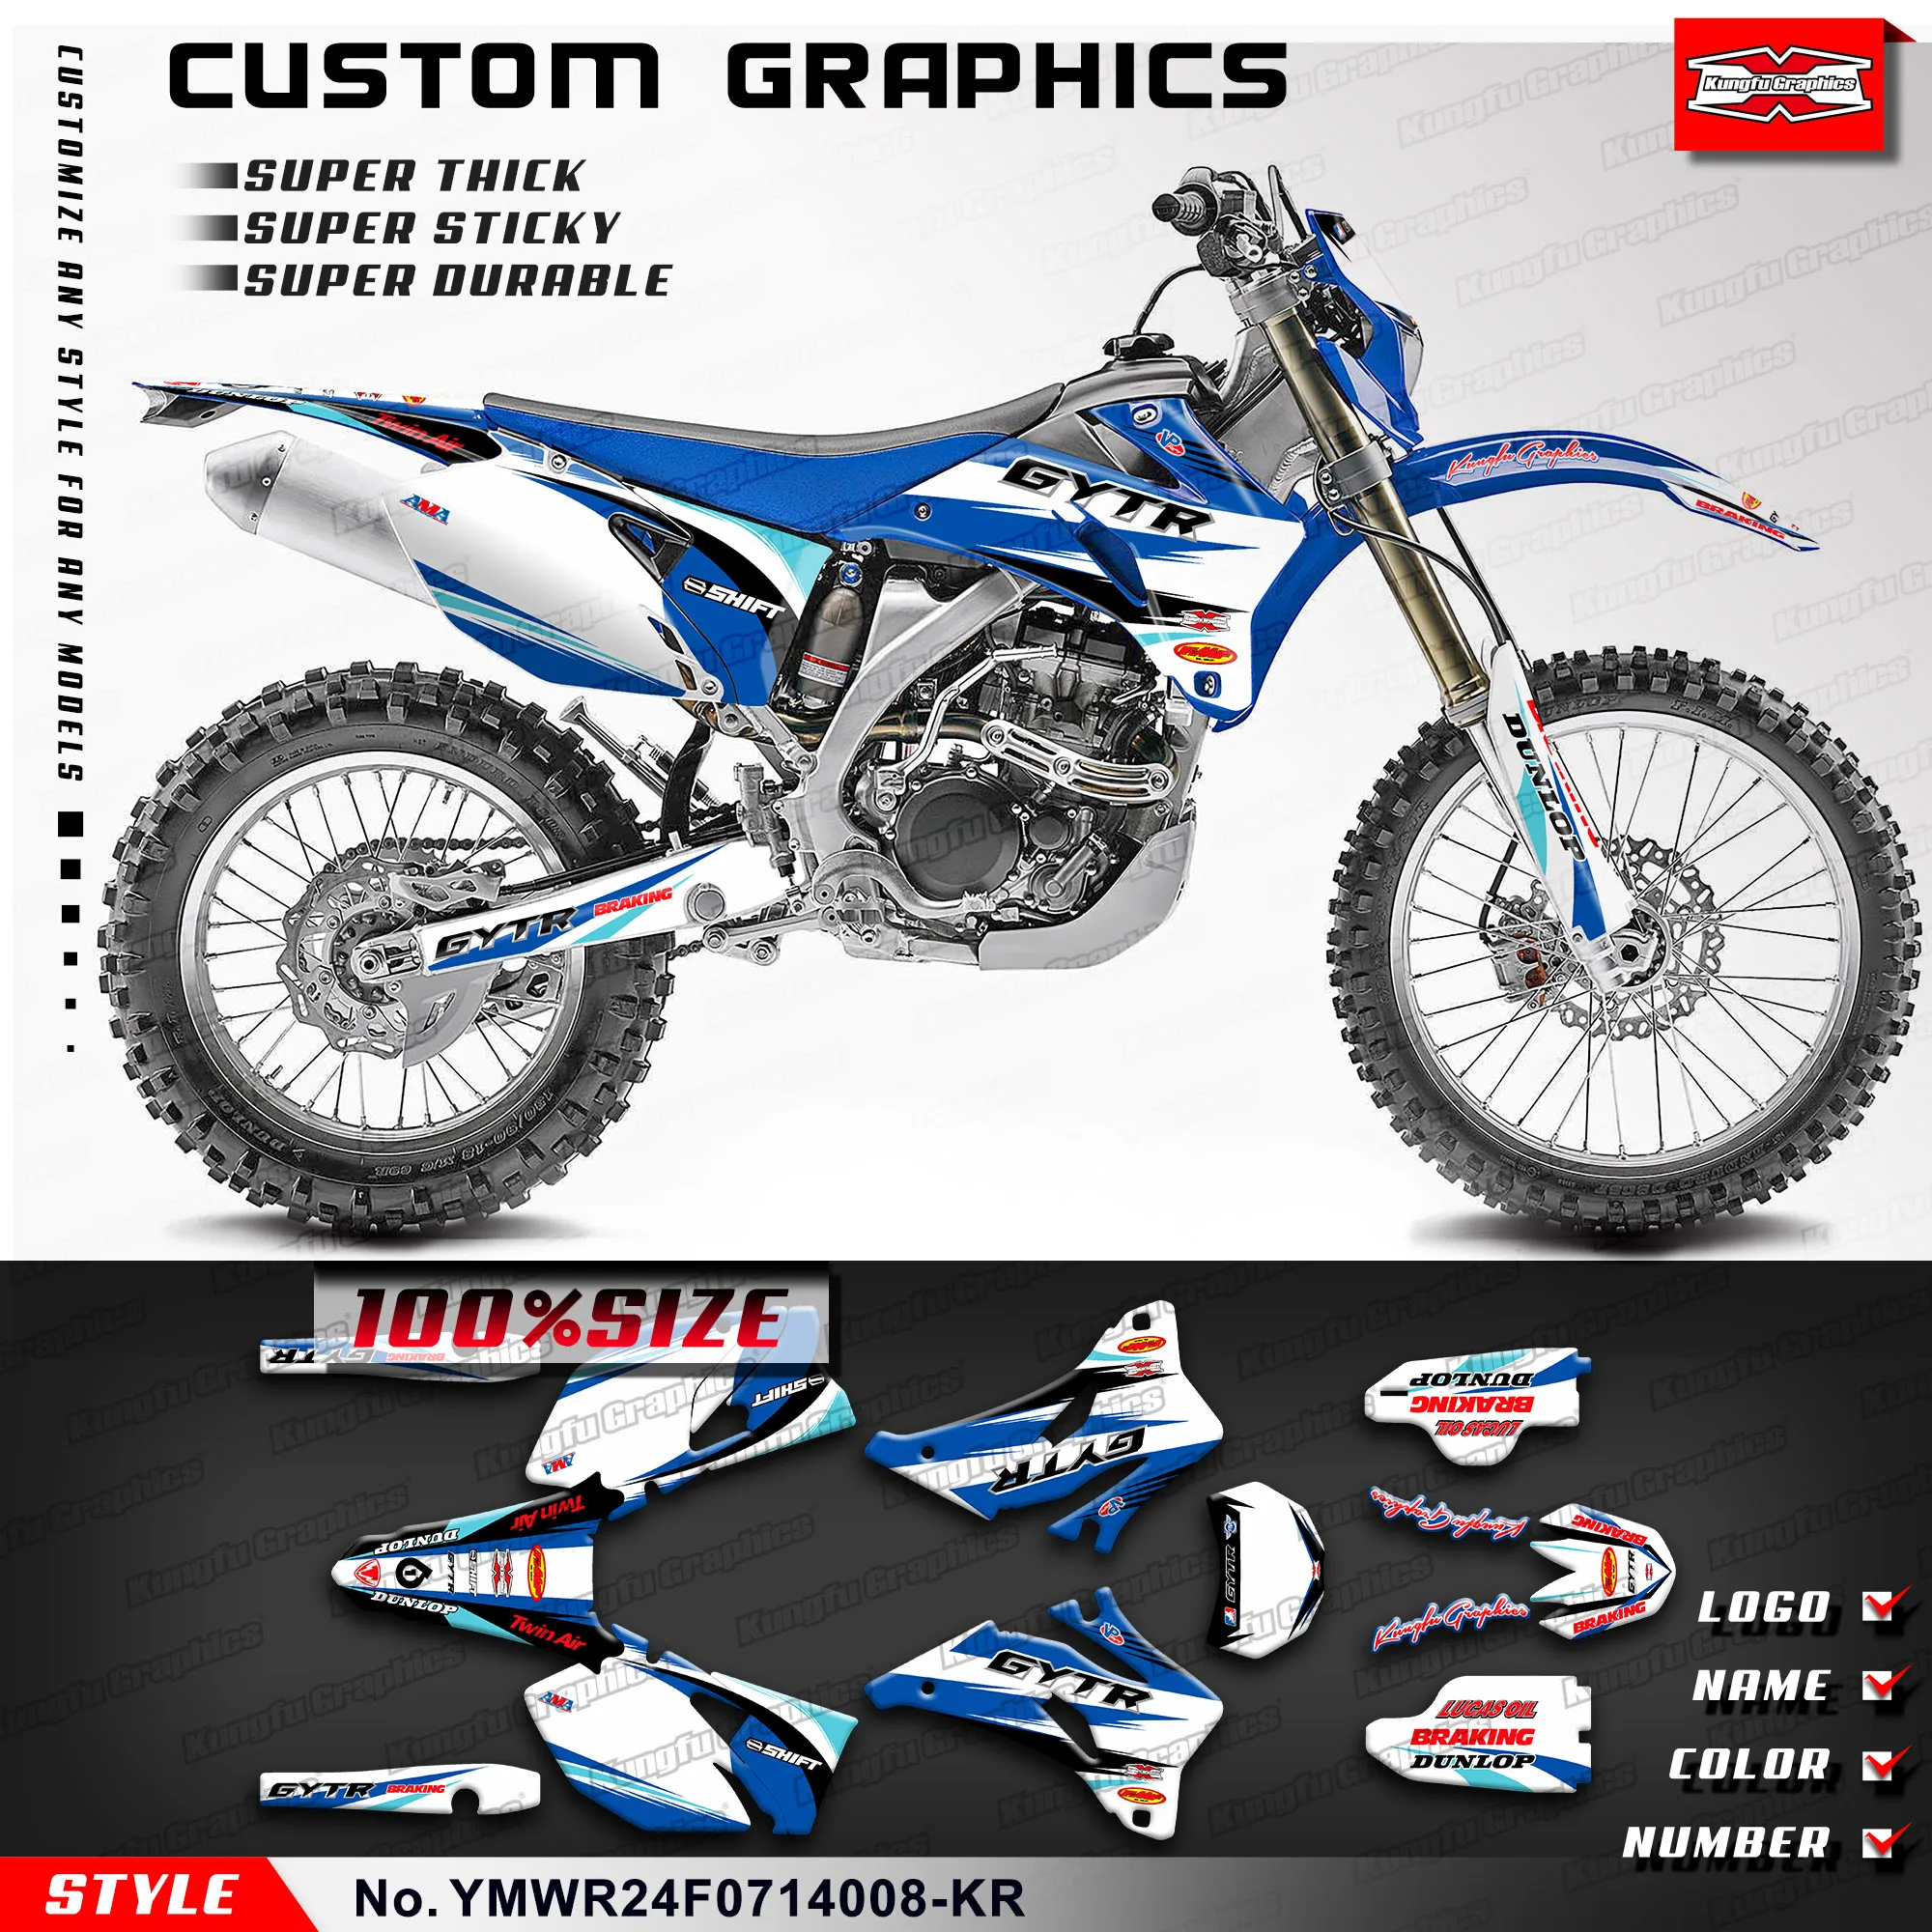 KUNGFU GRAPHICS MX Stickers Decal Kit for Yamaha WR 250F 450F WR250F WR450F 2007 2008 2009 2010 2011 2012 2013 2014, White Blue